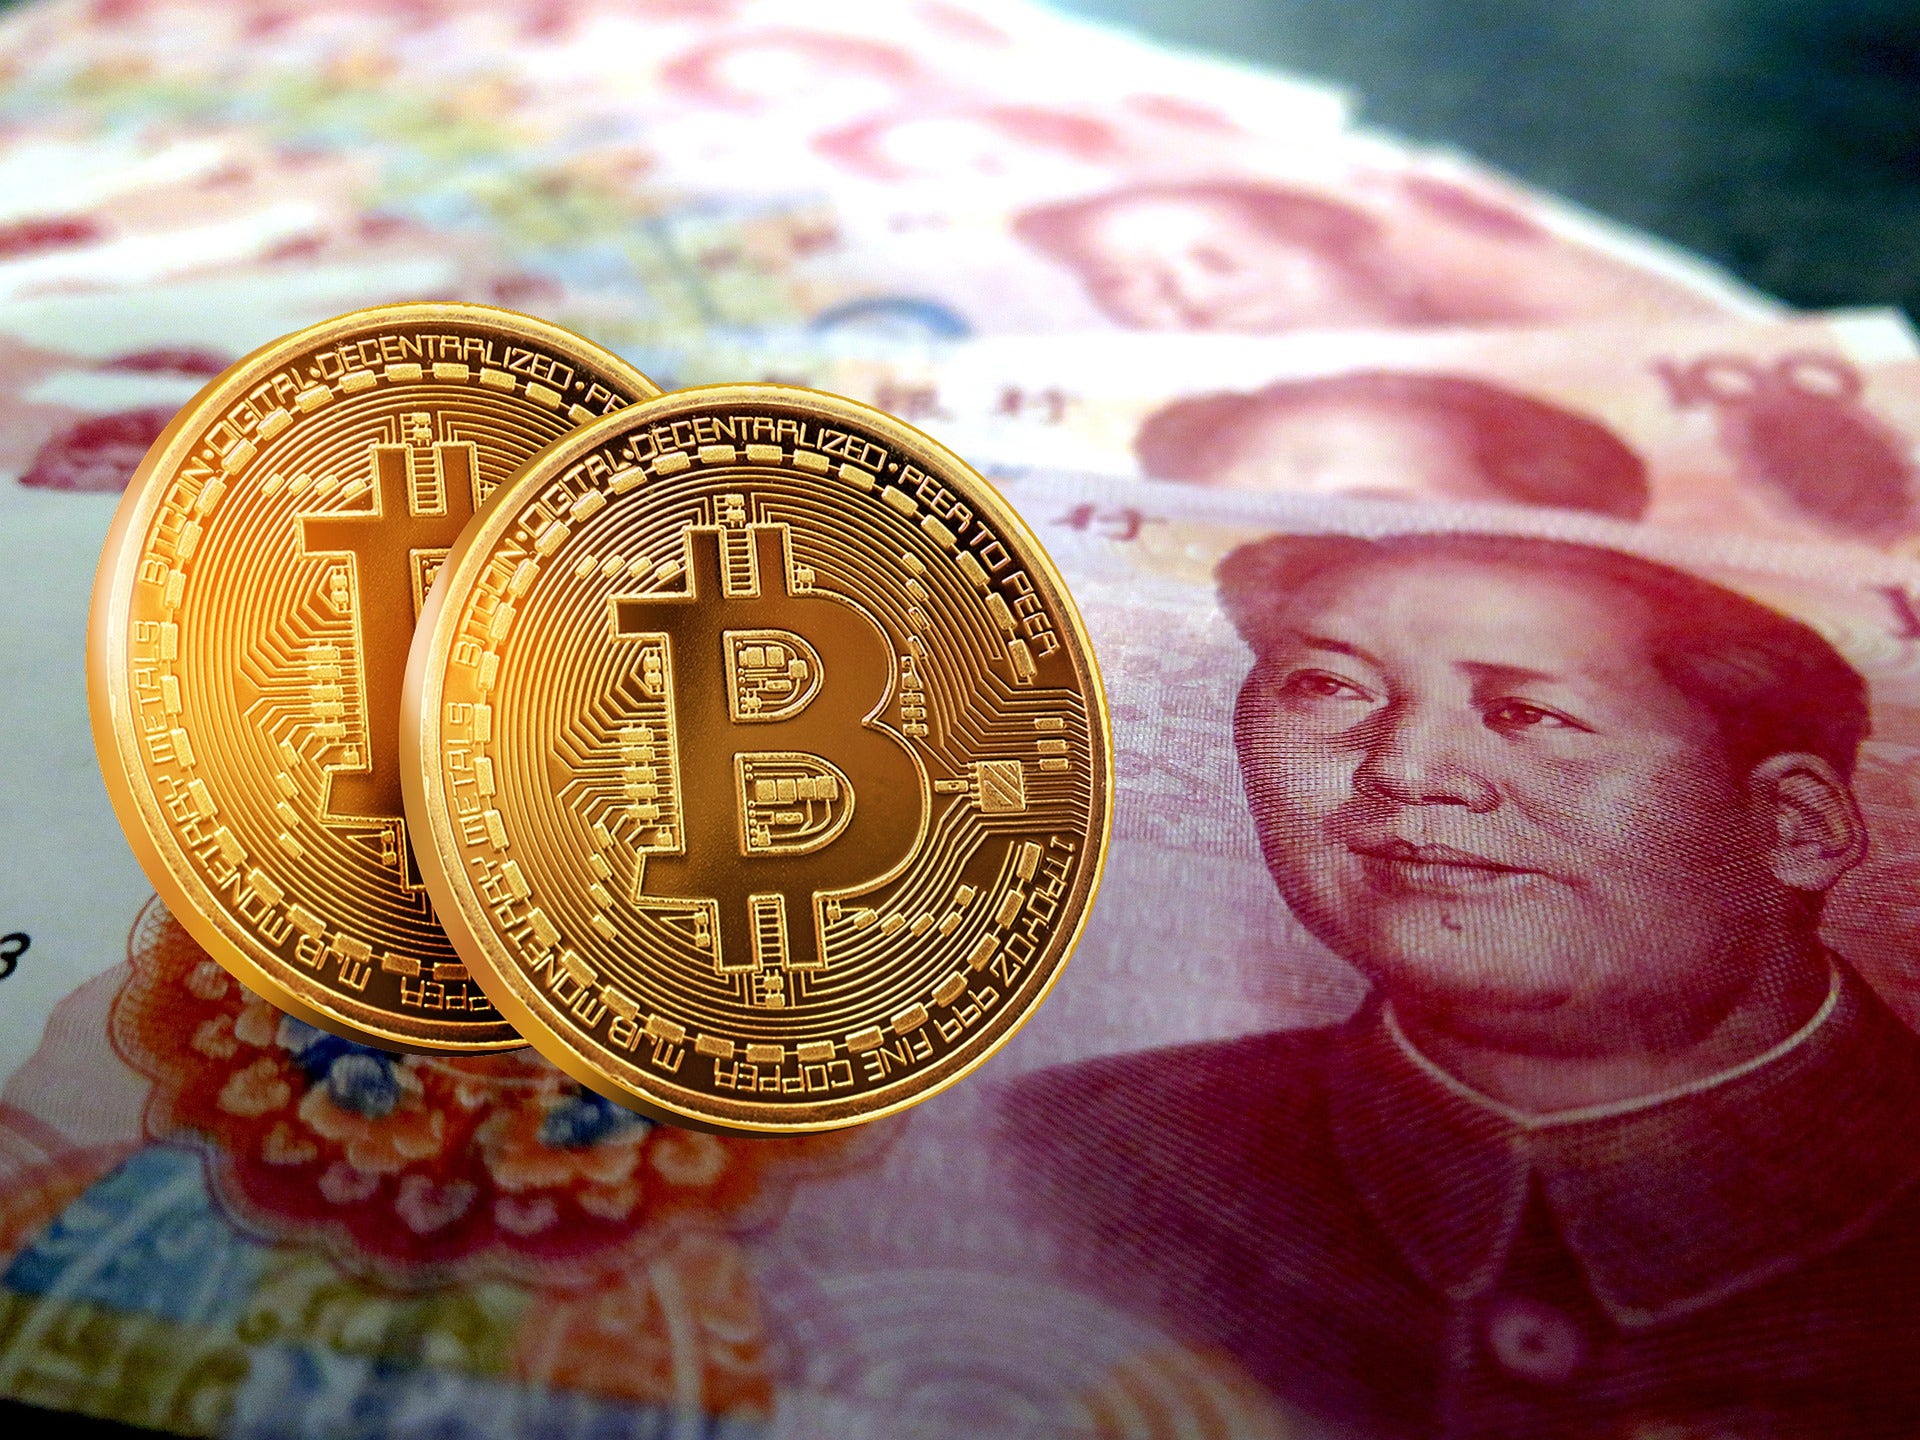 China Holds $6 Billion Worth Of Crypto, Could 'Kill' Crypto Markets If It Wishes: Analyst